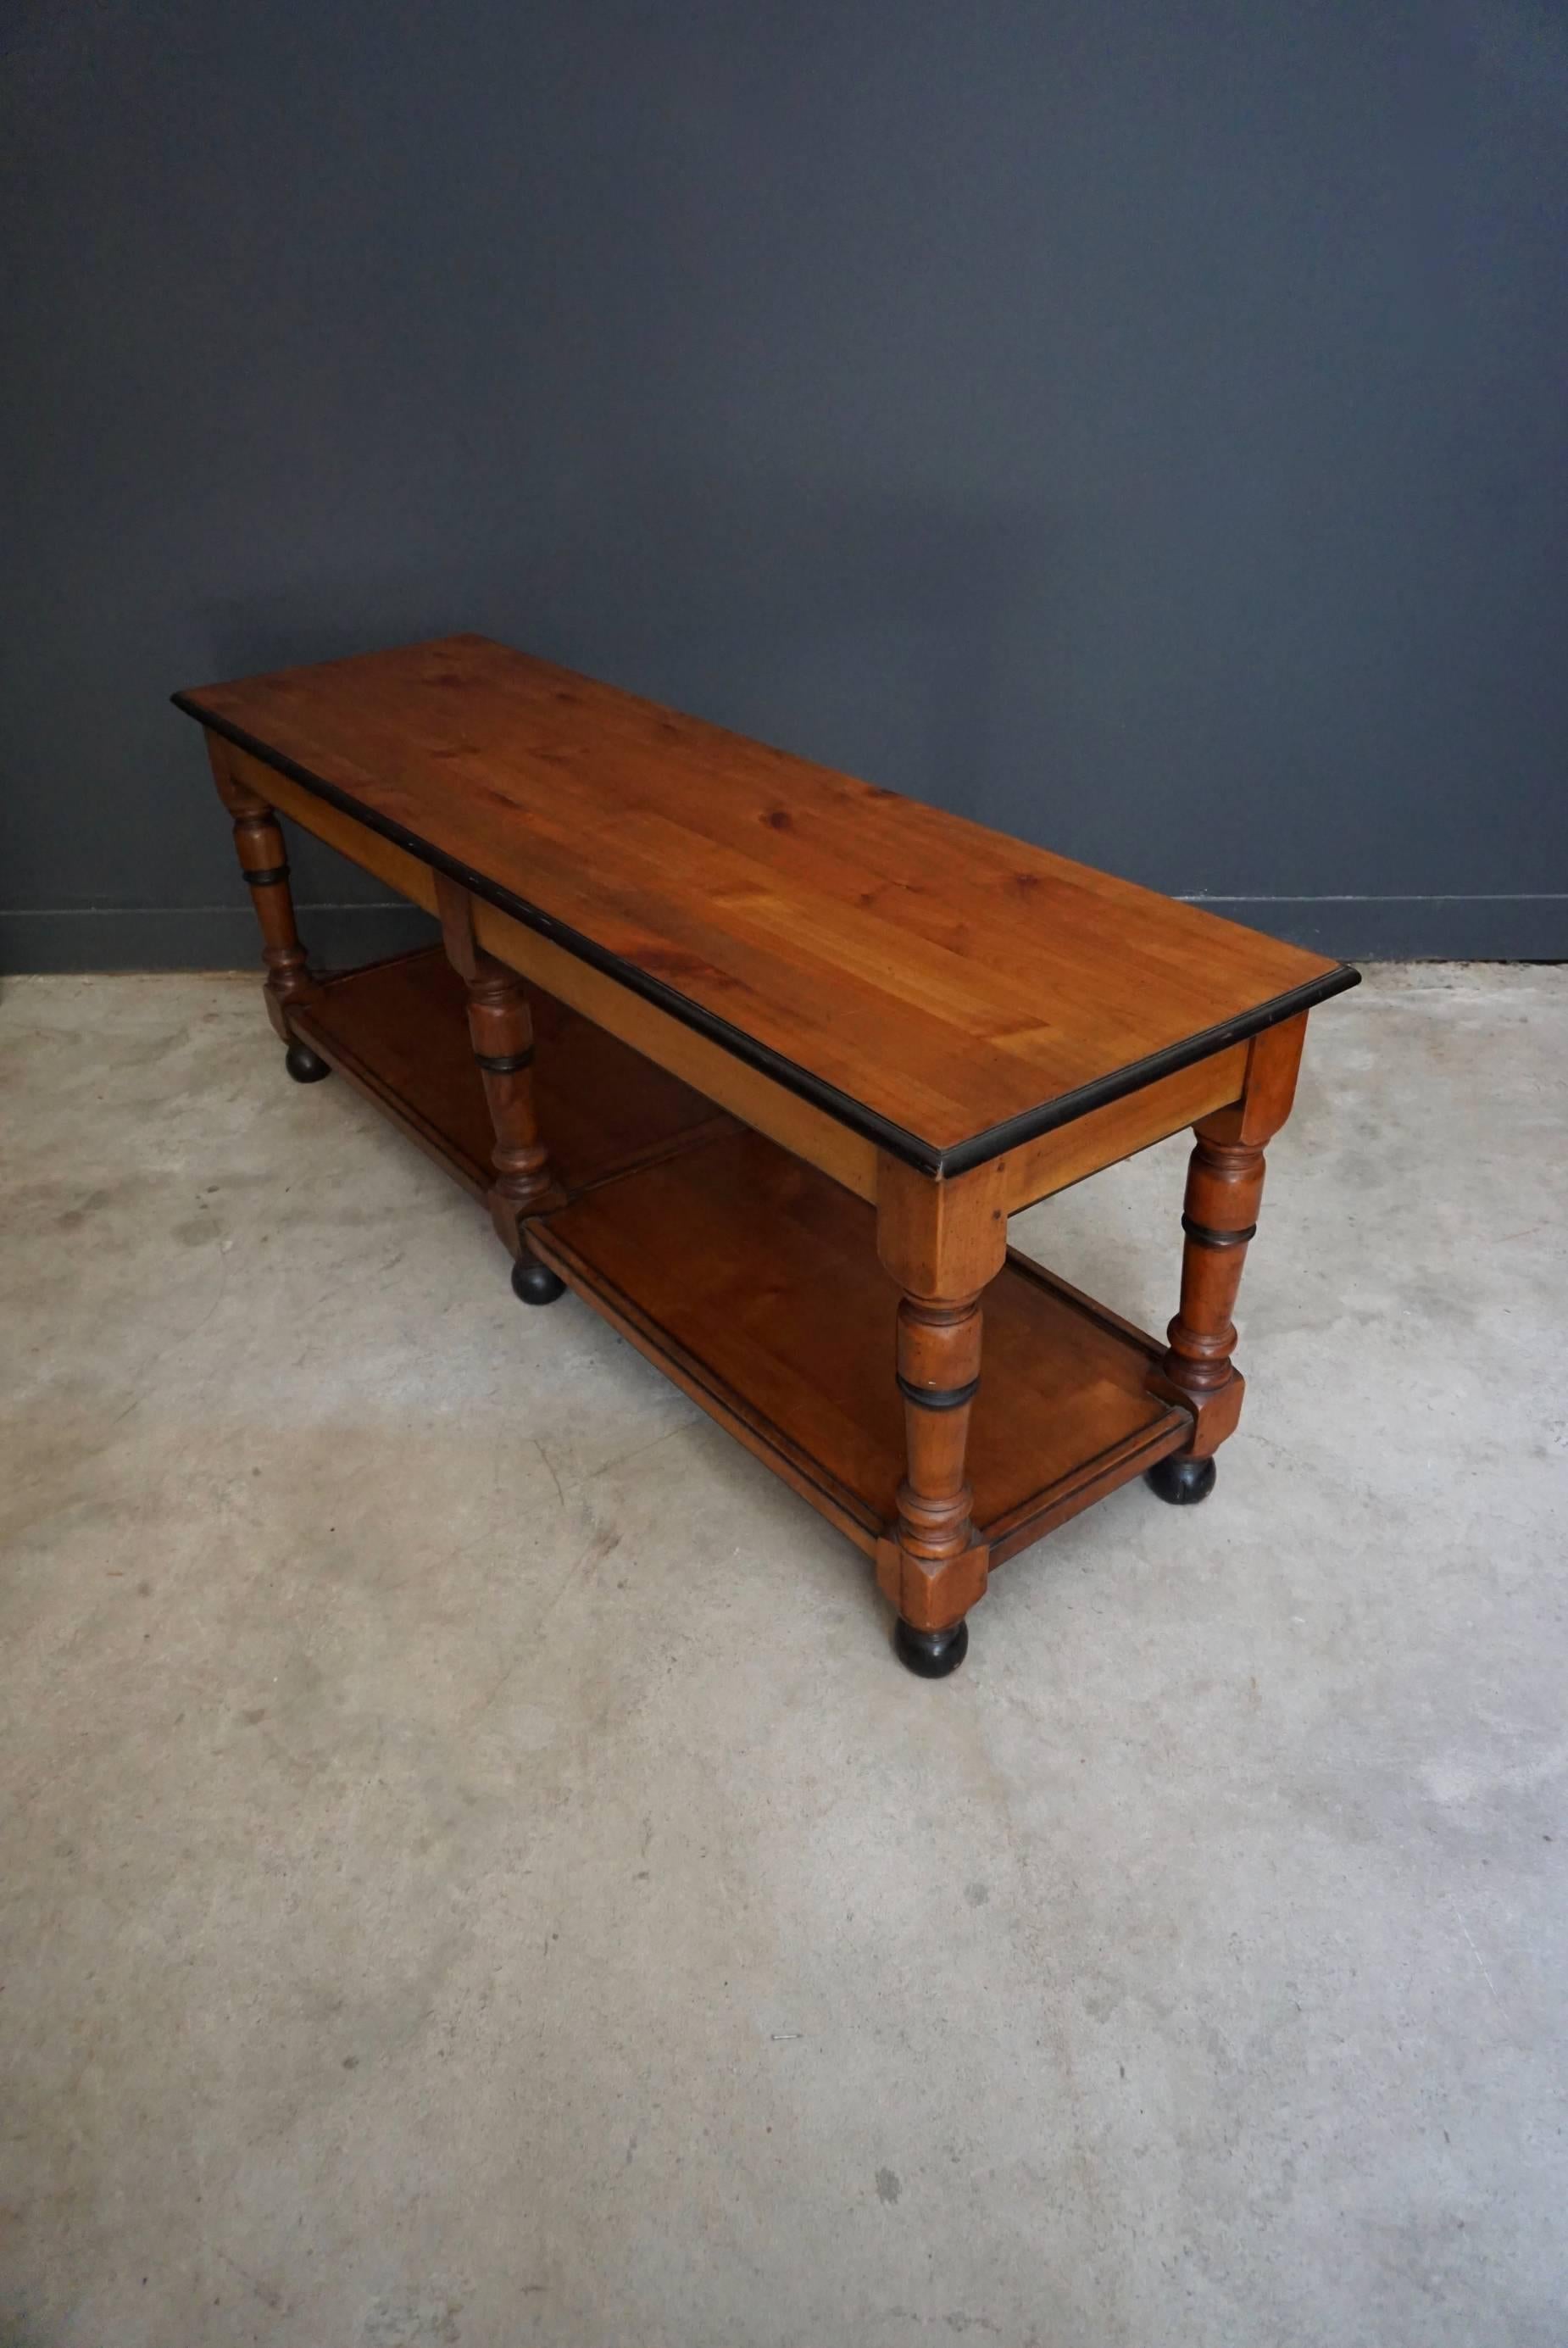 This French console table was designed and made circa late 19th century from solid cherrywood. It remains in a very good condition. It can be used as a display table in a shop or as a side table.